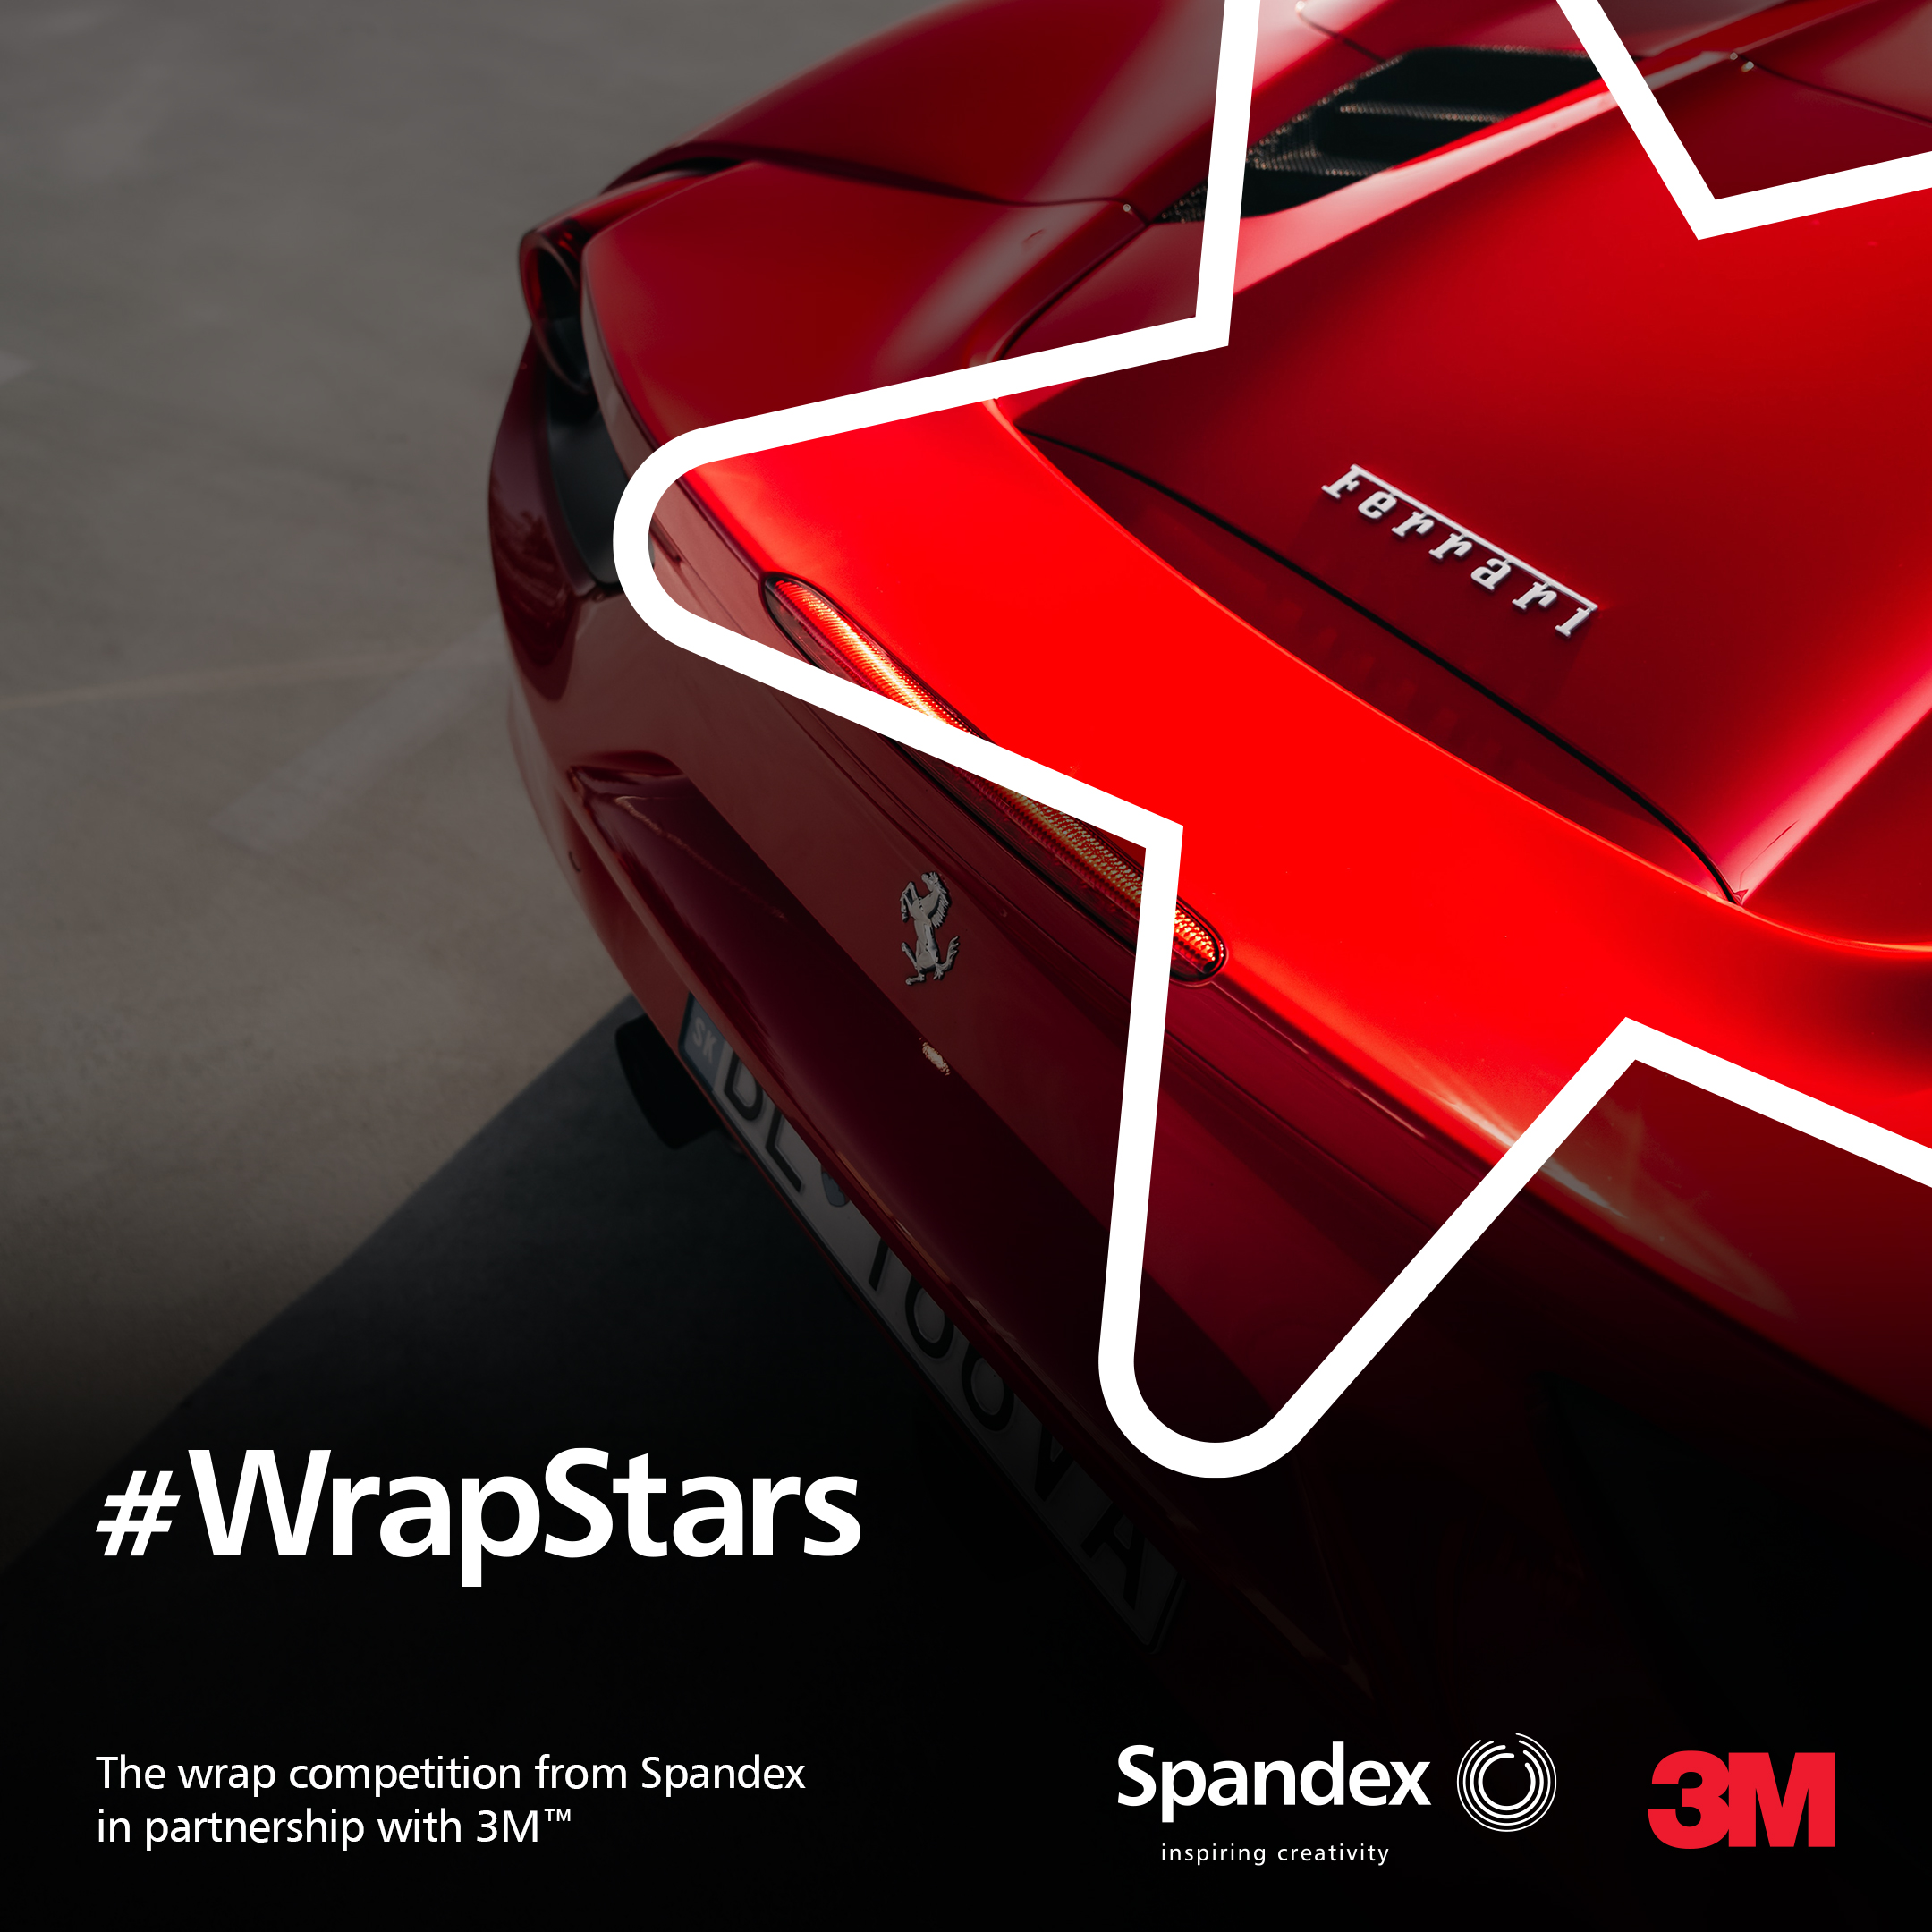 Spandex and 3M announce ‘Wrap Stars’ competition winner